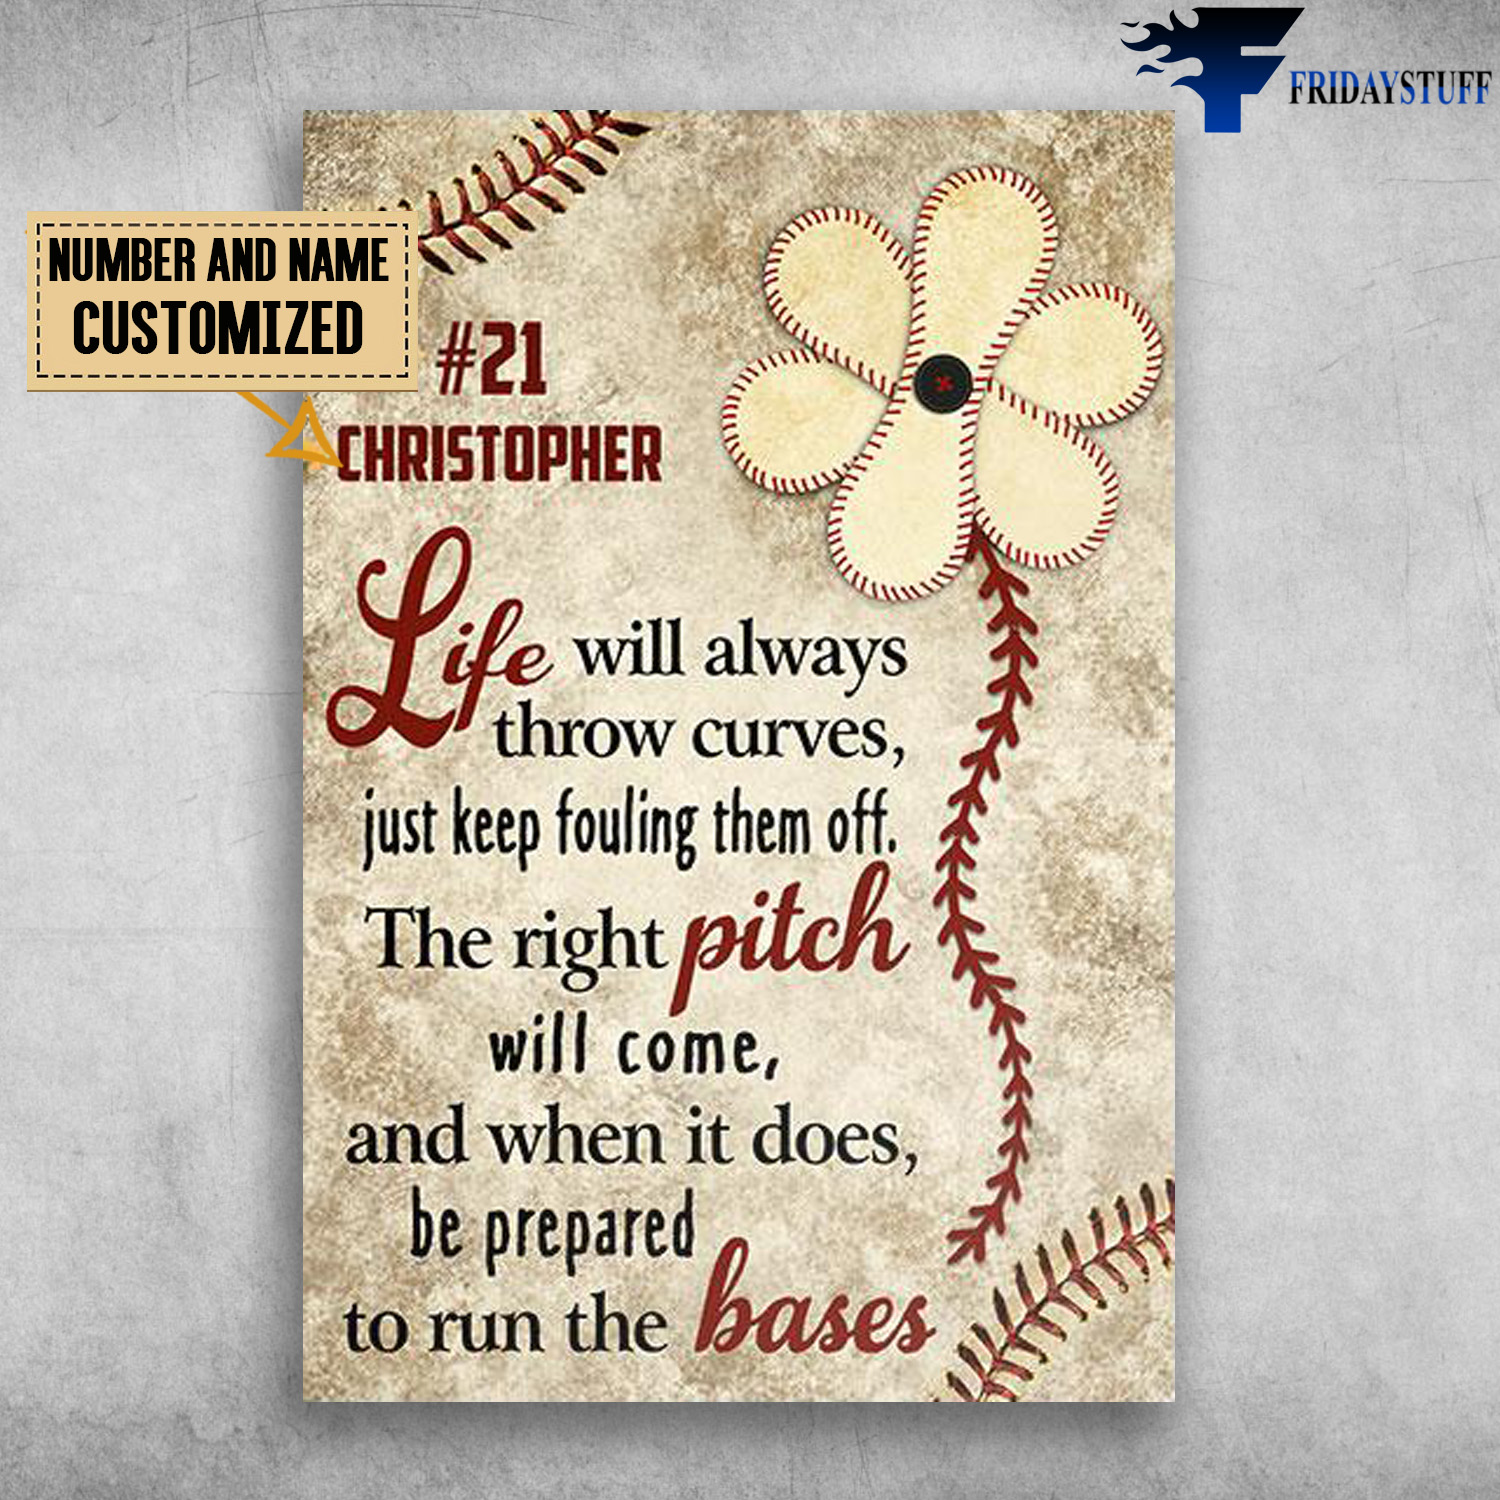 Baseball, Life Will Always Throw Curves, Just Keep Fouling Them Off, The Right Pitch Will Come, And When It Does, Be Prepared To Run The Bases